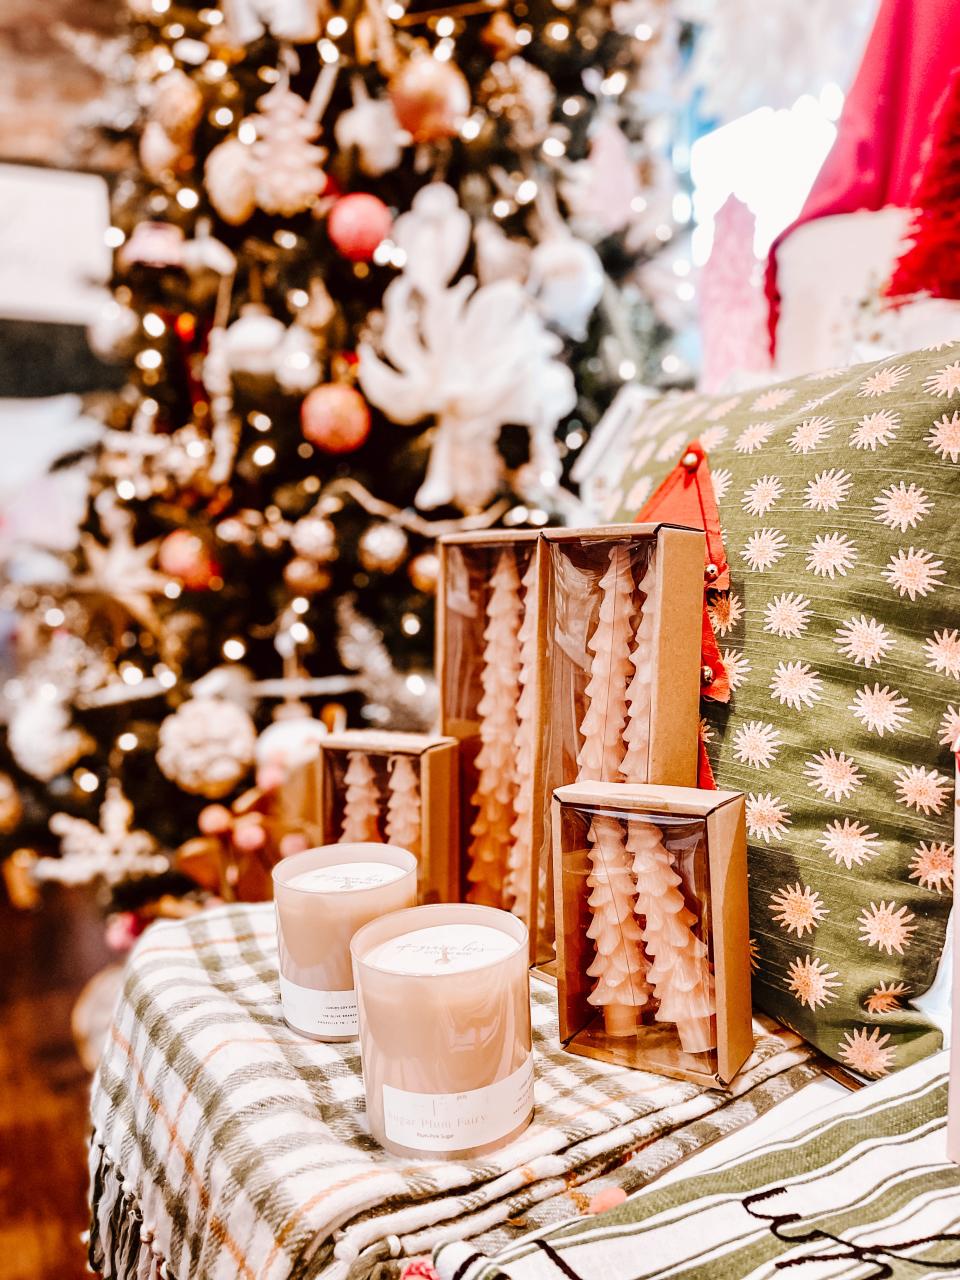 Gracie Lee’s Gifts & More hand tapered Christmas candles in blush, green or off-white.